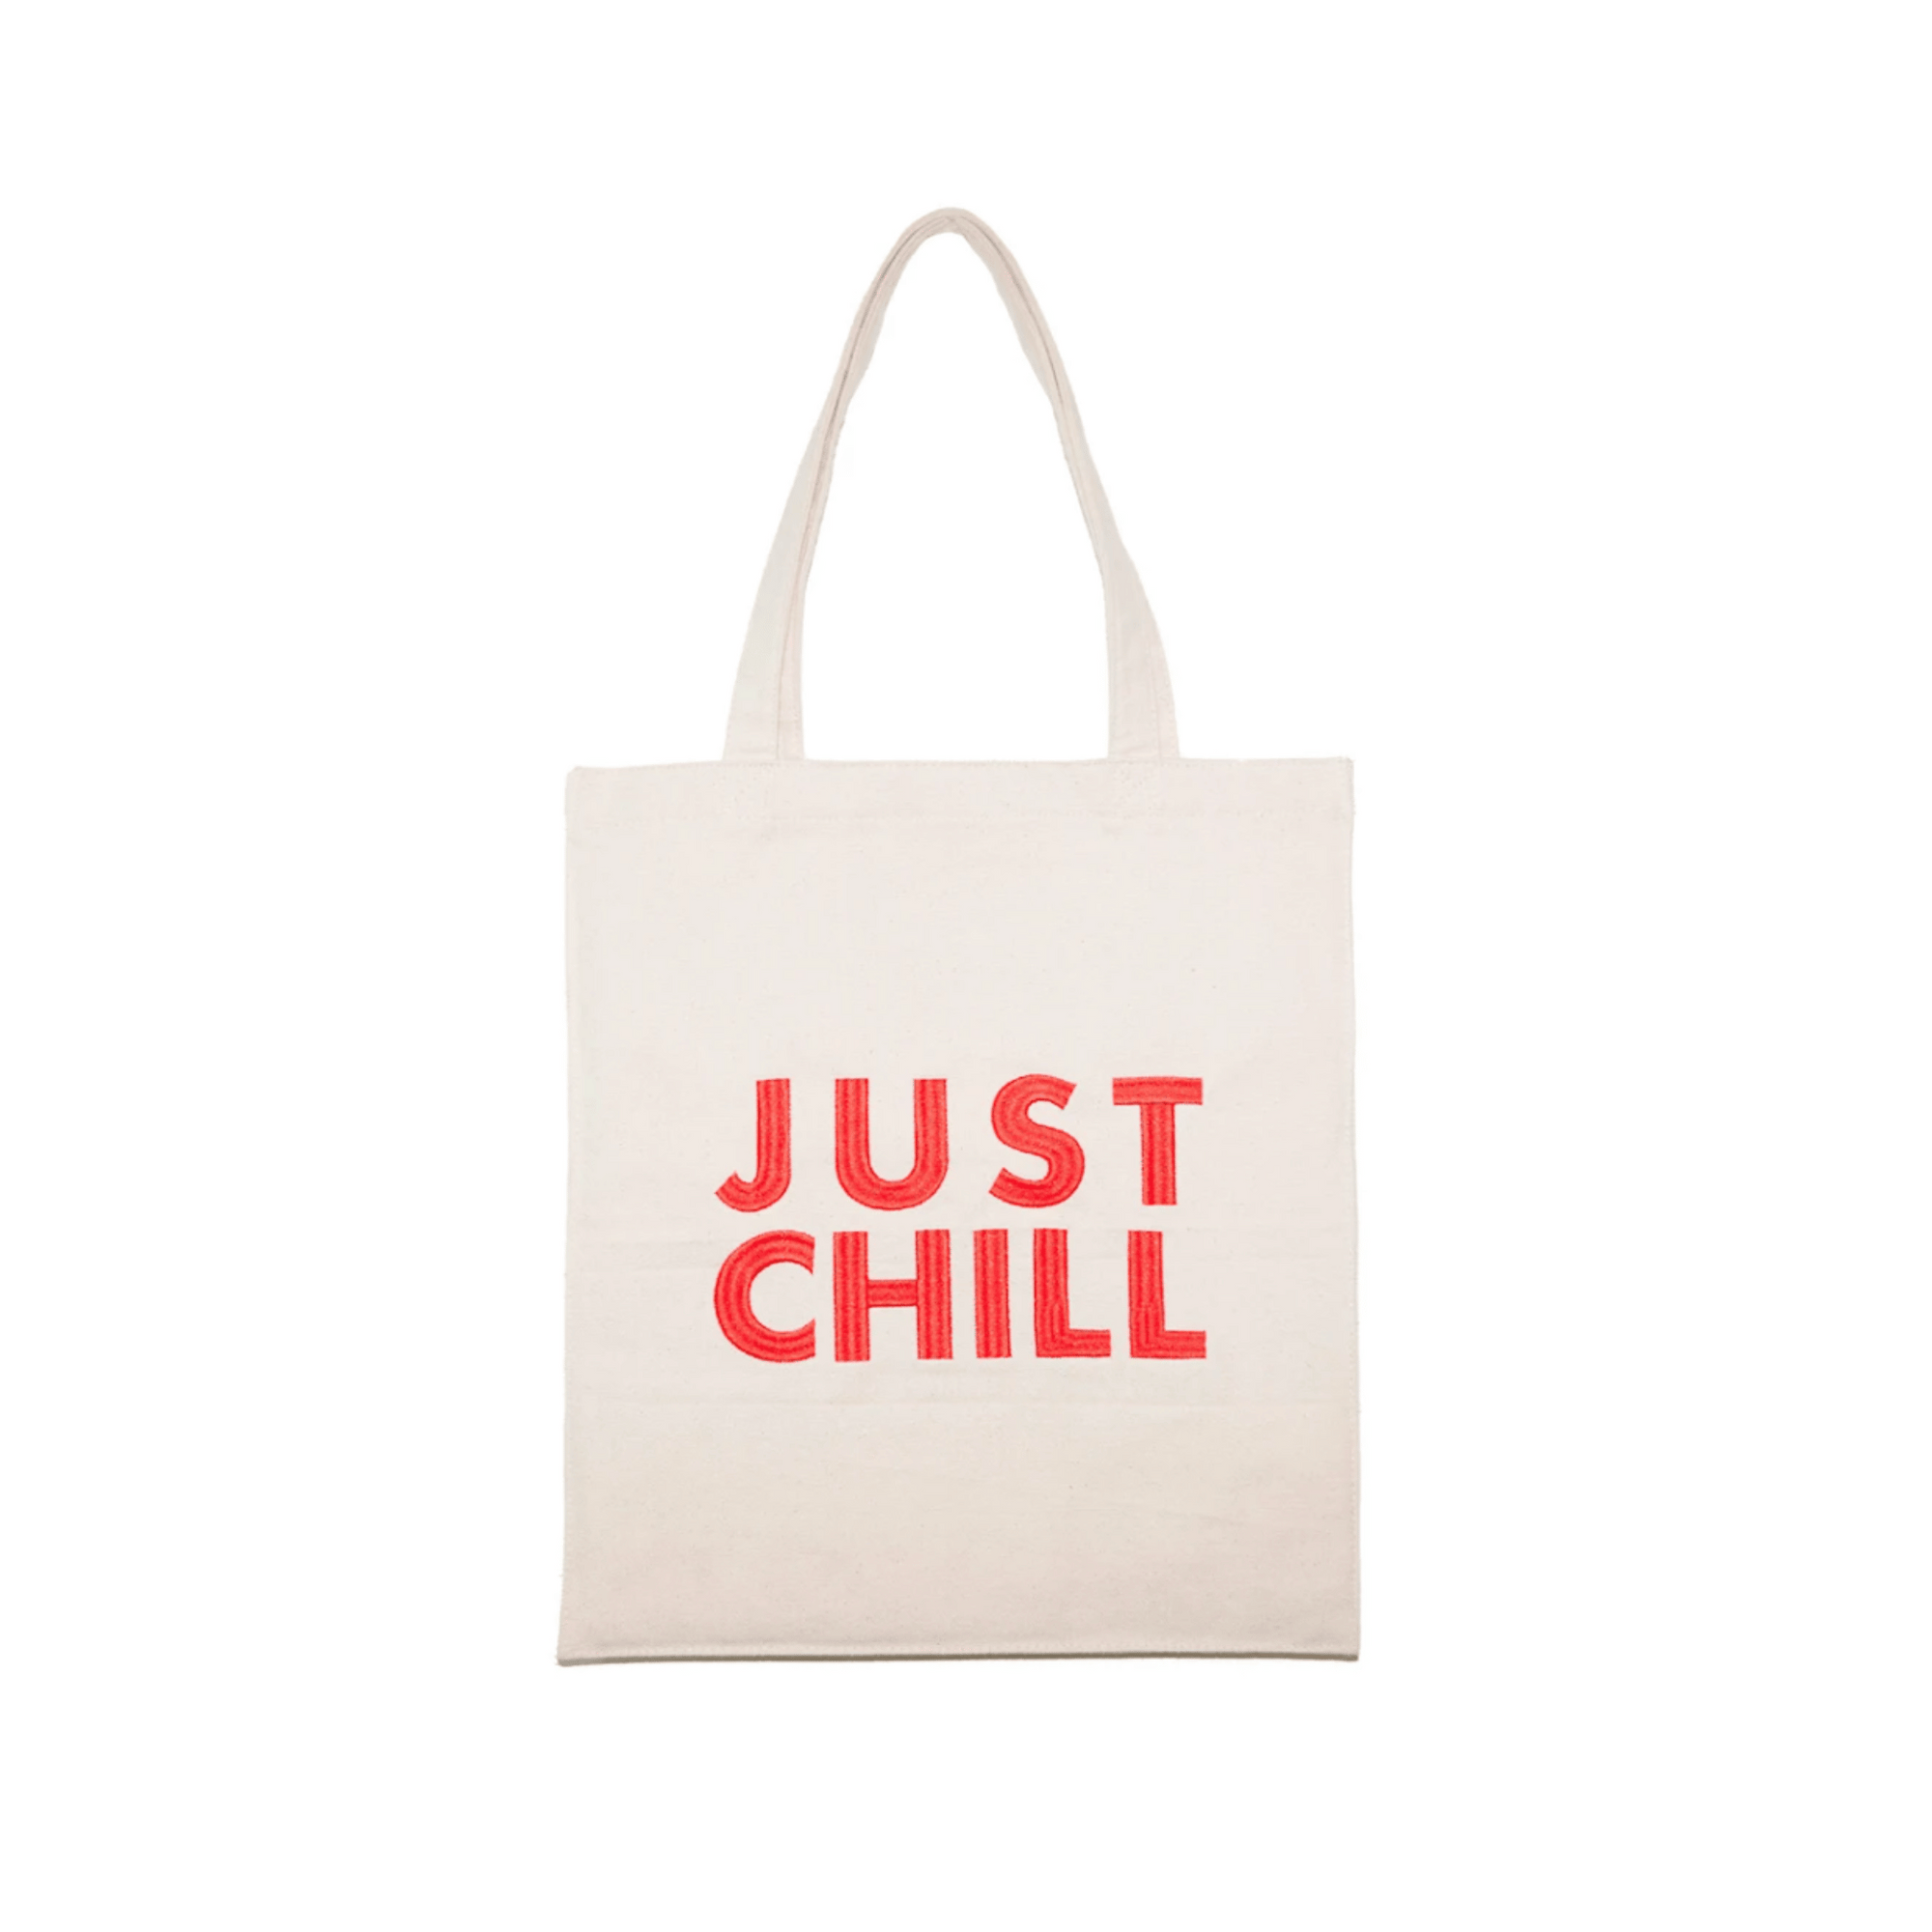 JUST CHILL TOTE BAG